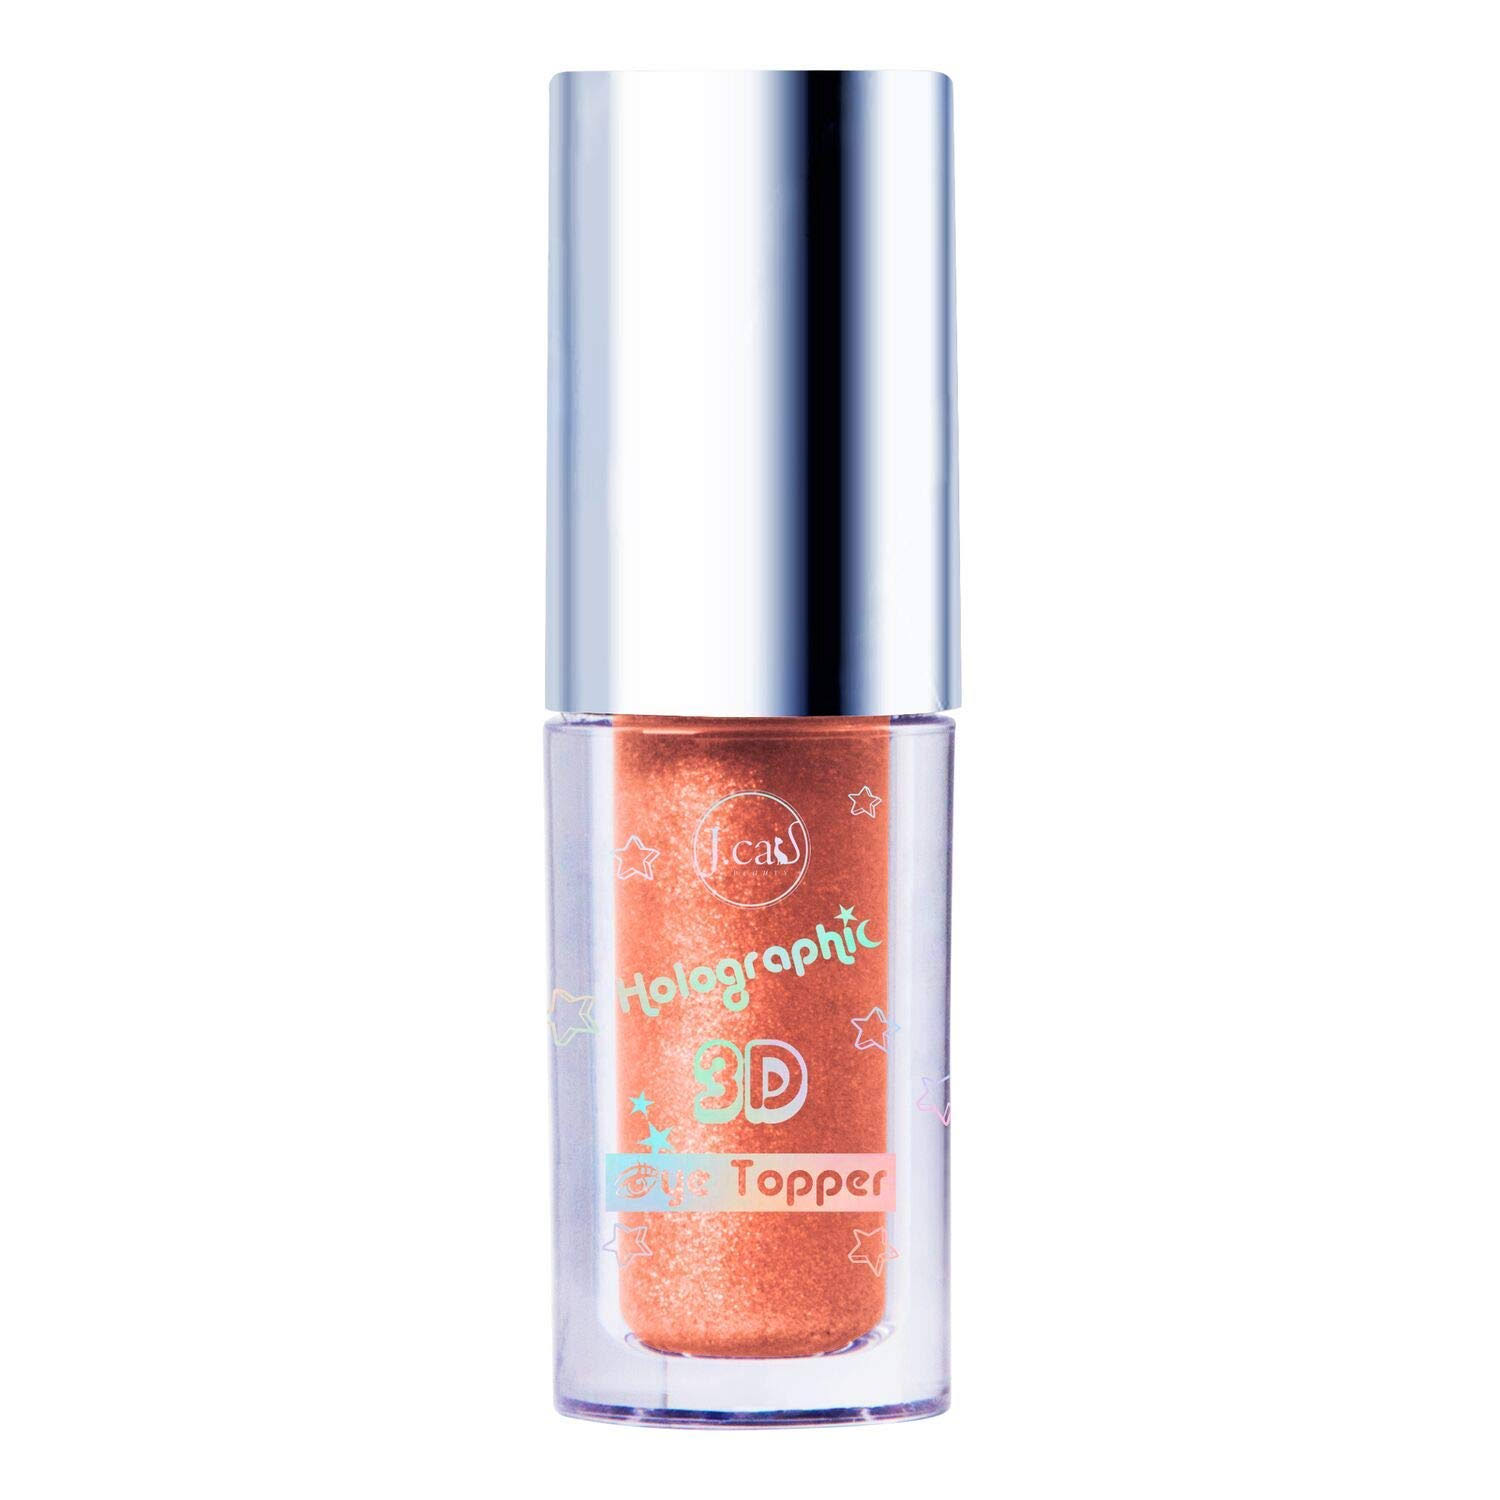 J. Cat Beauty Holographic 3D Eye Topper Pinch Me, Peachy